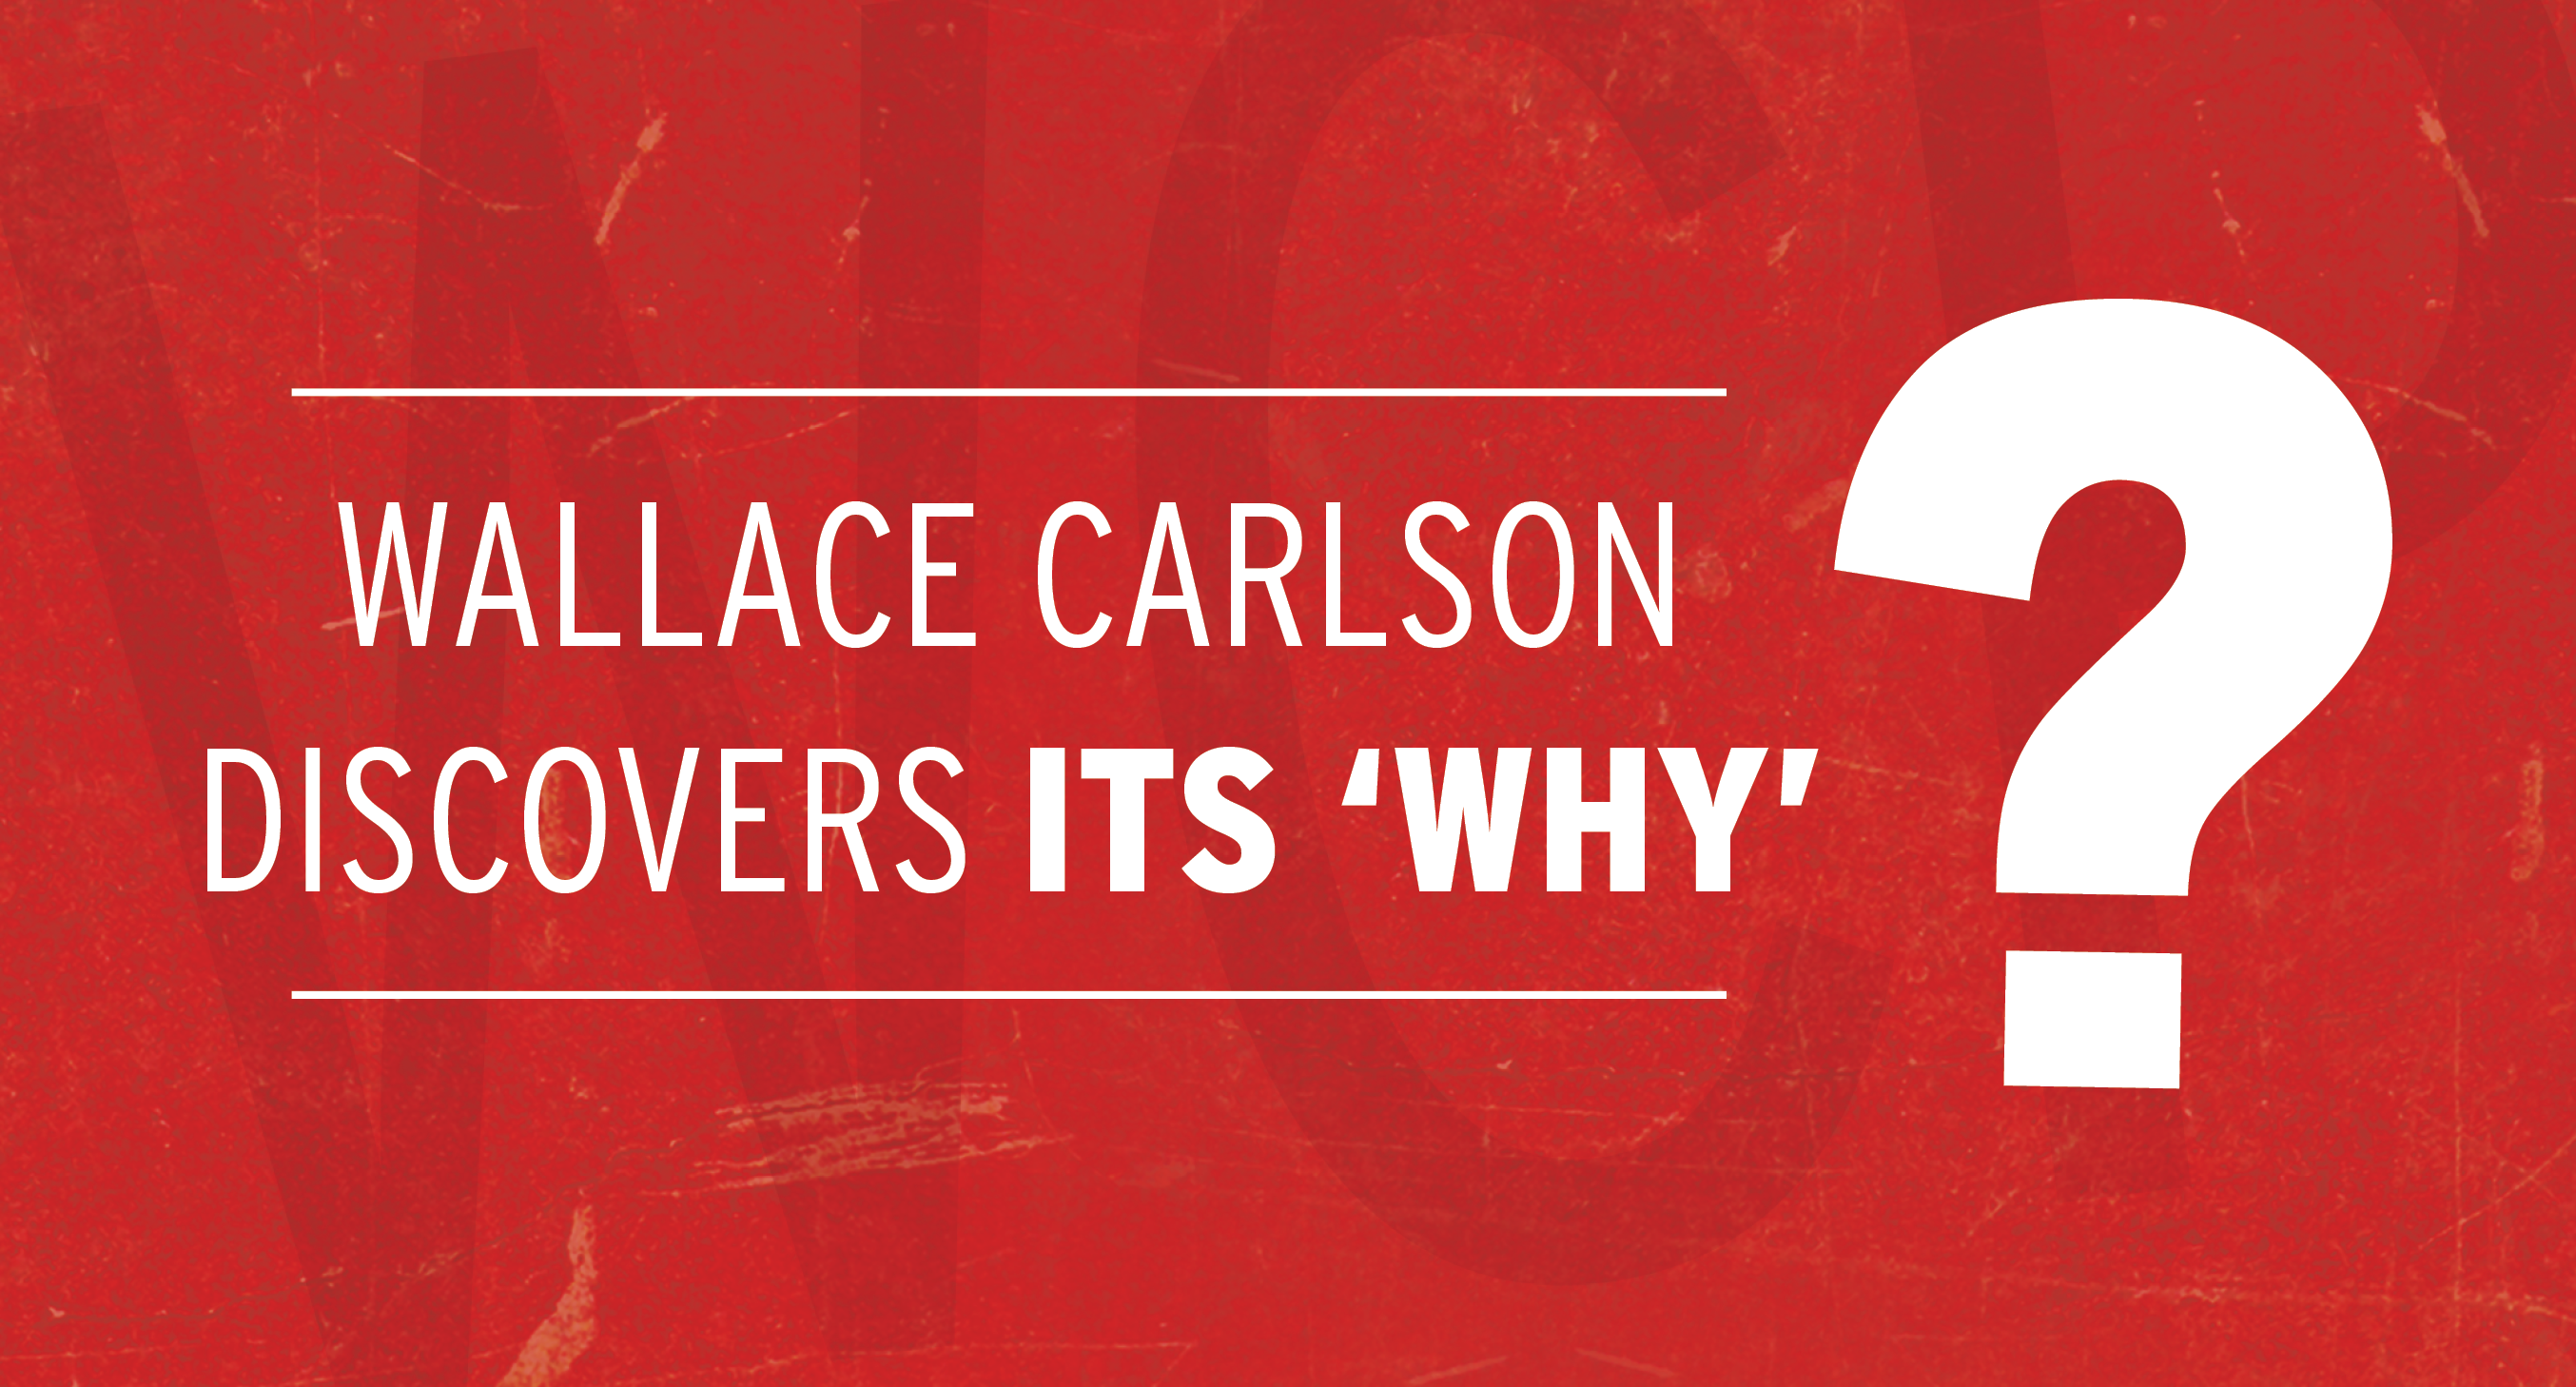 WALLACE CARLSON DISCOVERS ITS ‘WHY’